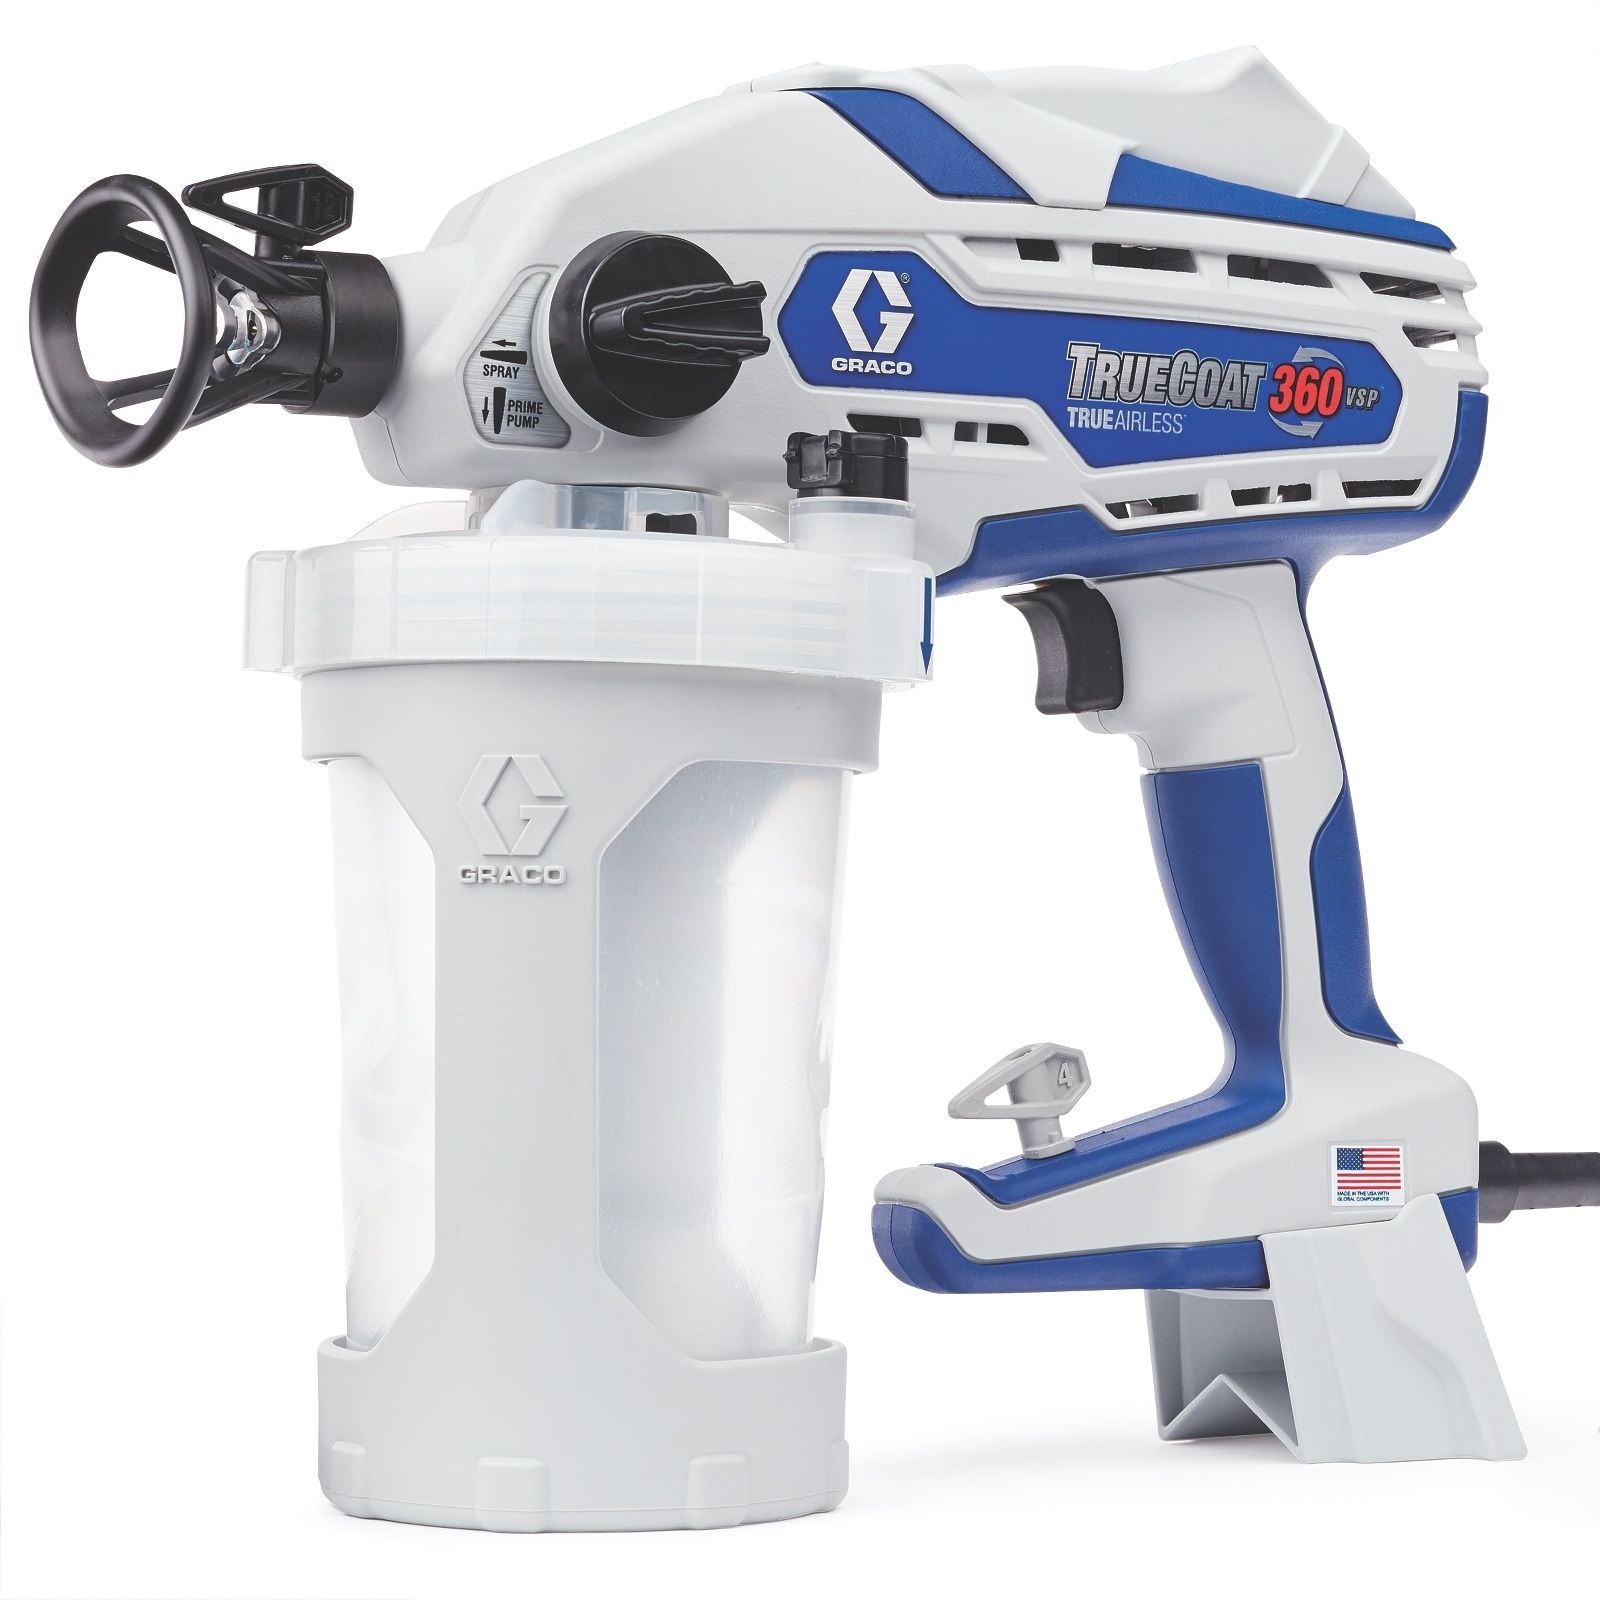 Comparing the Wagner Flexio 3500 to the Graco Airless Handheld Paintsprayer